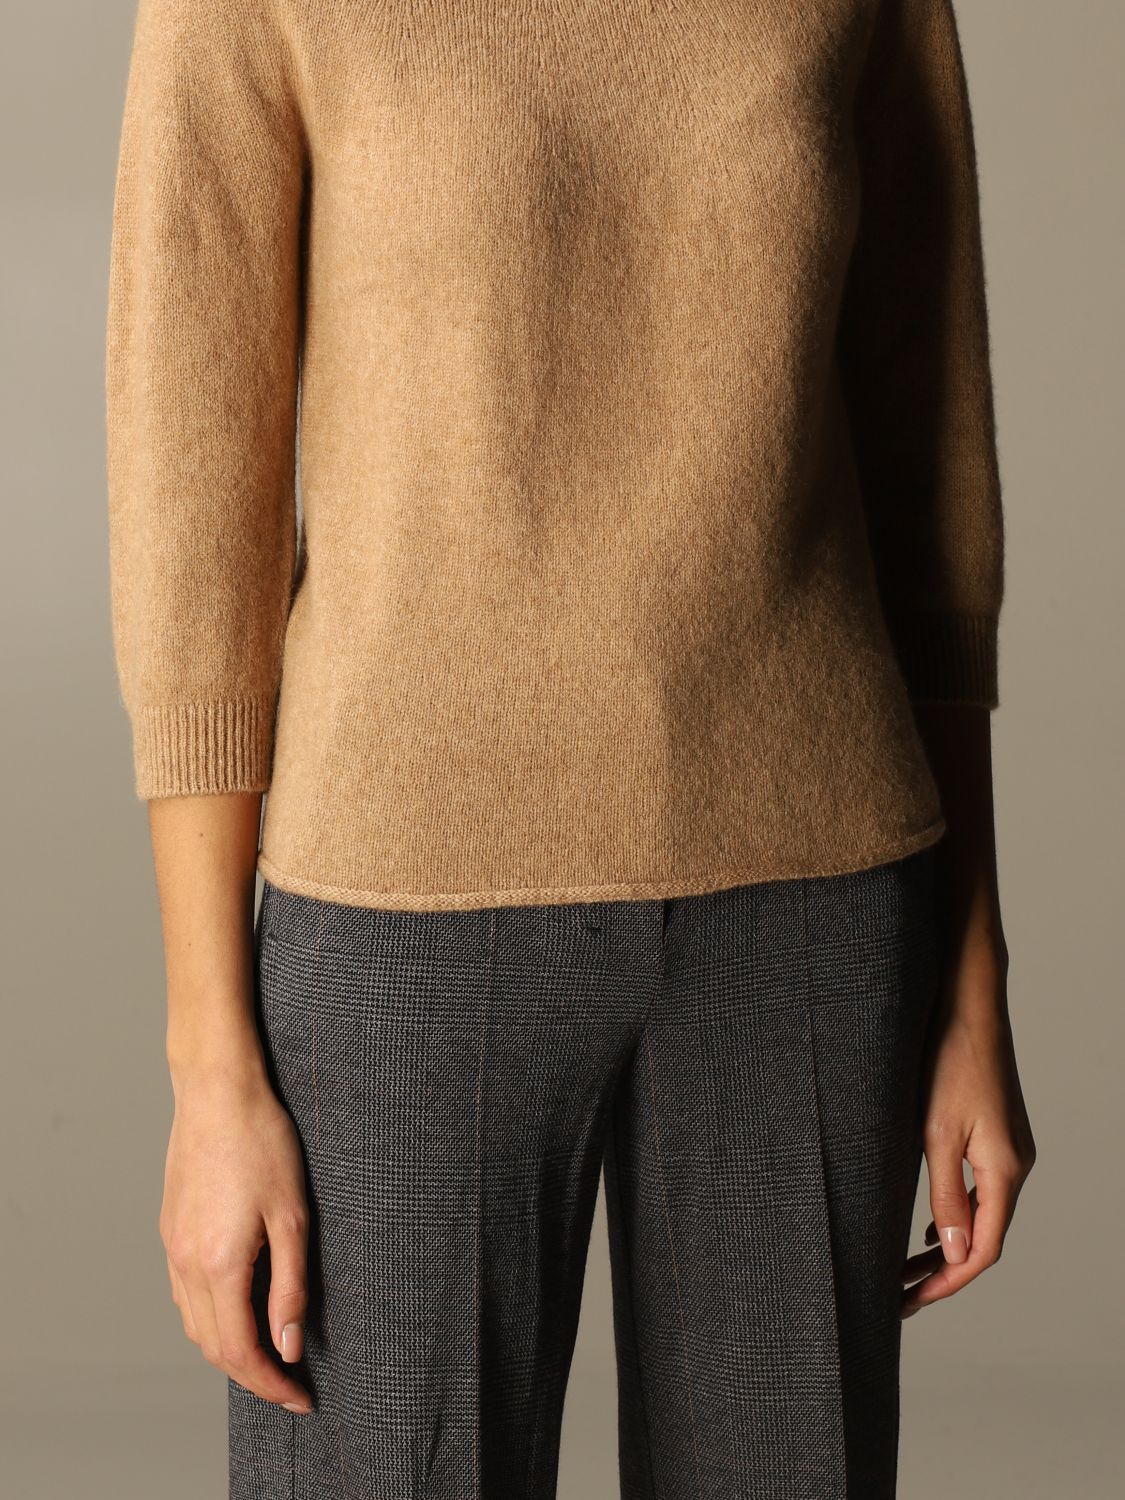 Max Mara Outlet: Campo pullover in wool and cashmere - Camel | Sweater